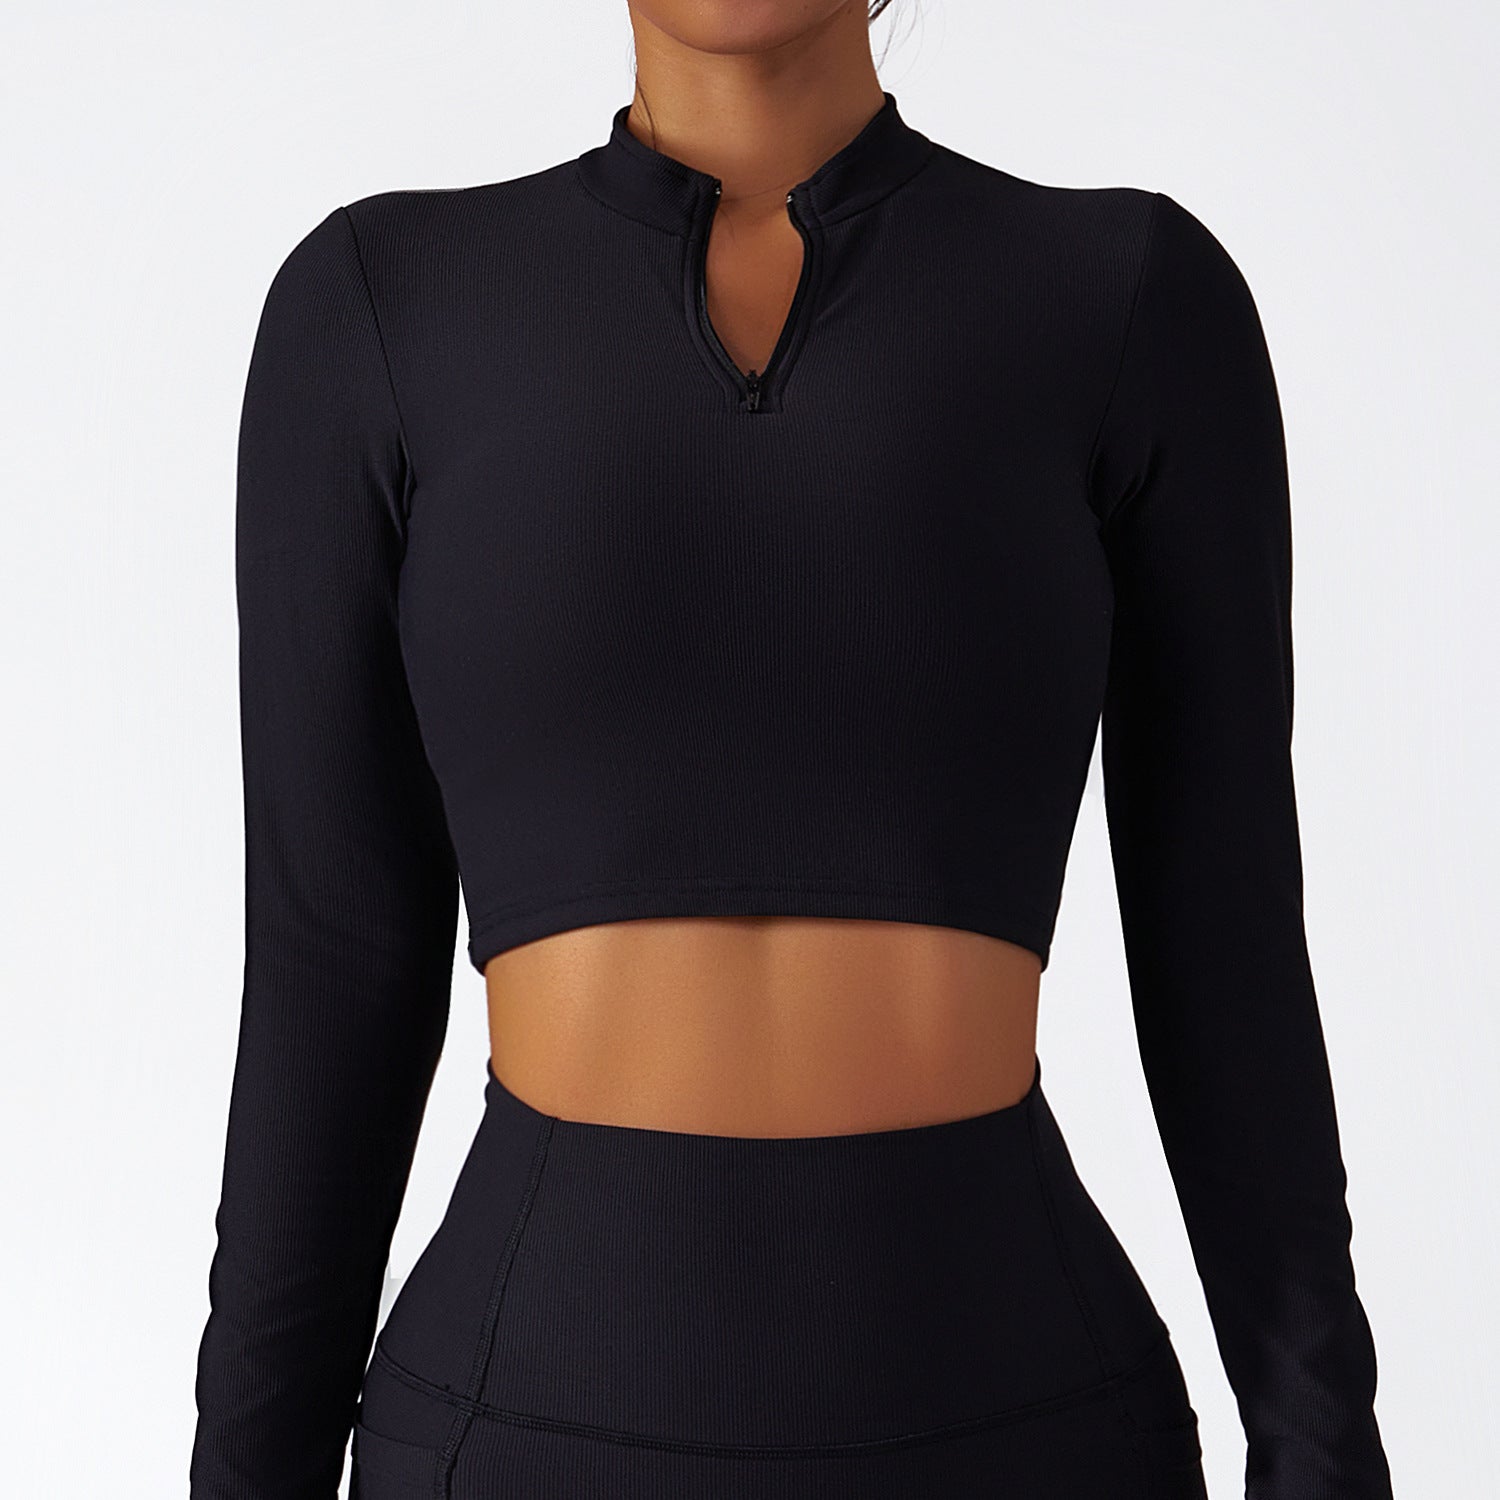 Stand Collar Zipper Long-Sleeved Yoga Clothes Female Quick Dry Exercise Running Fitness Tops Thin Slim High-Intensity Sportswear